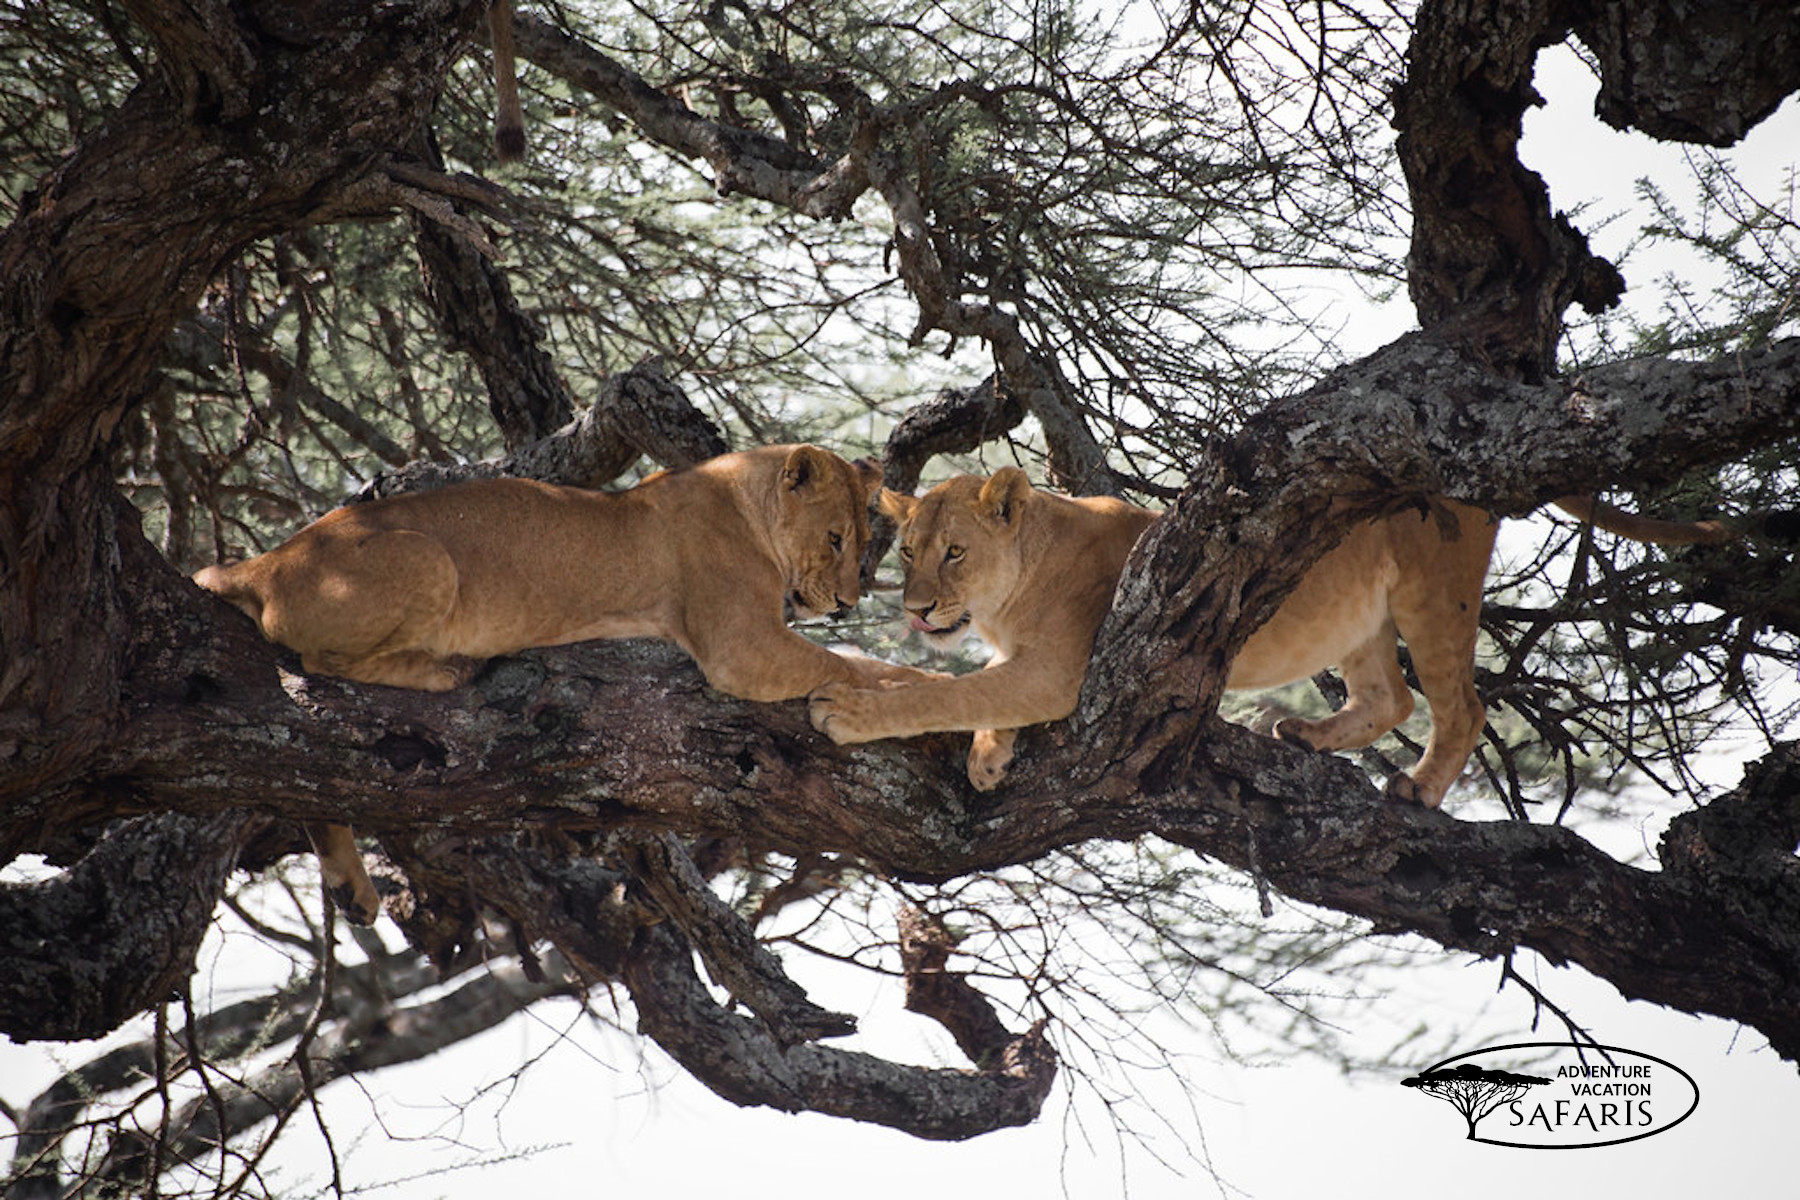 Cuddling lions up on the tree